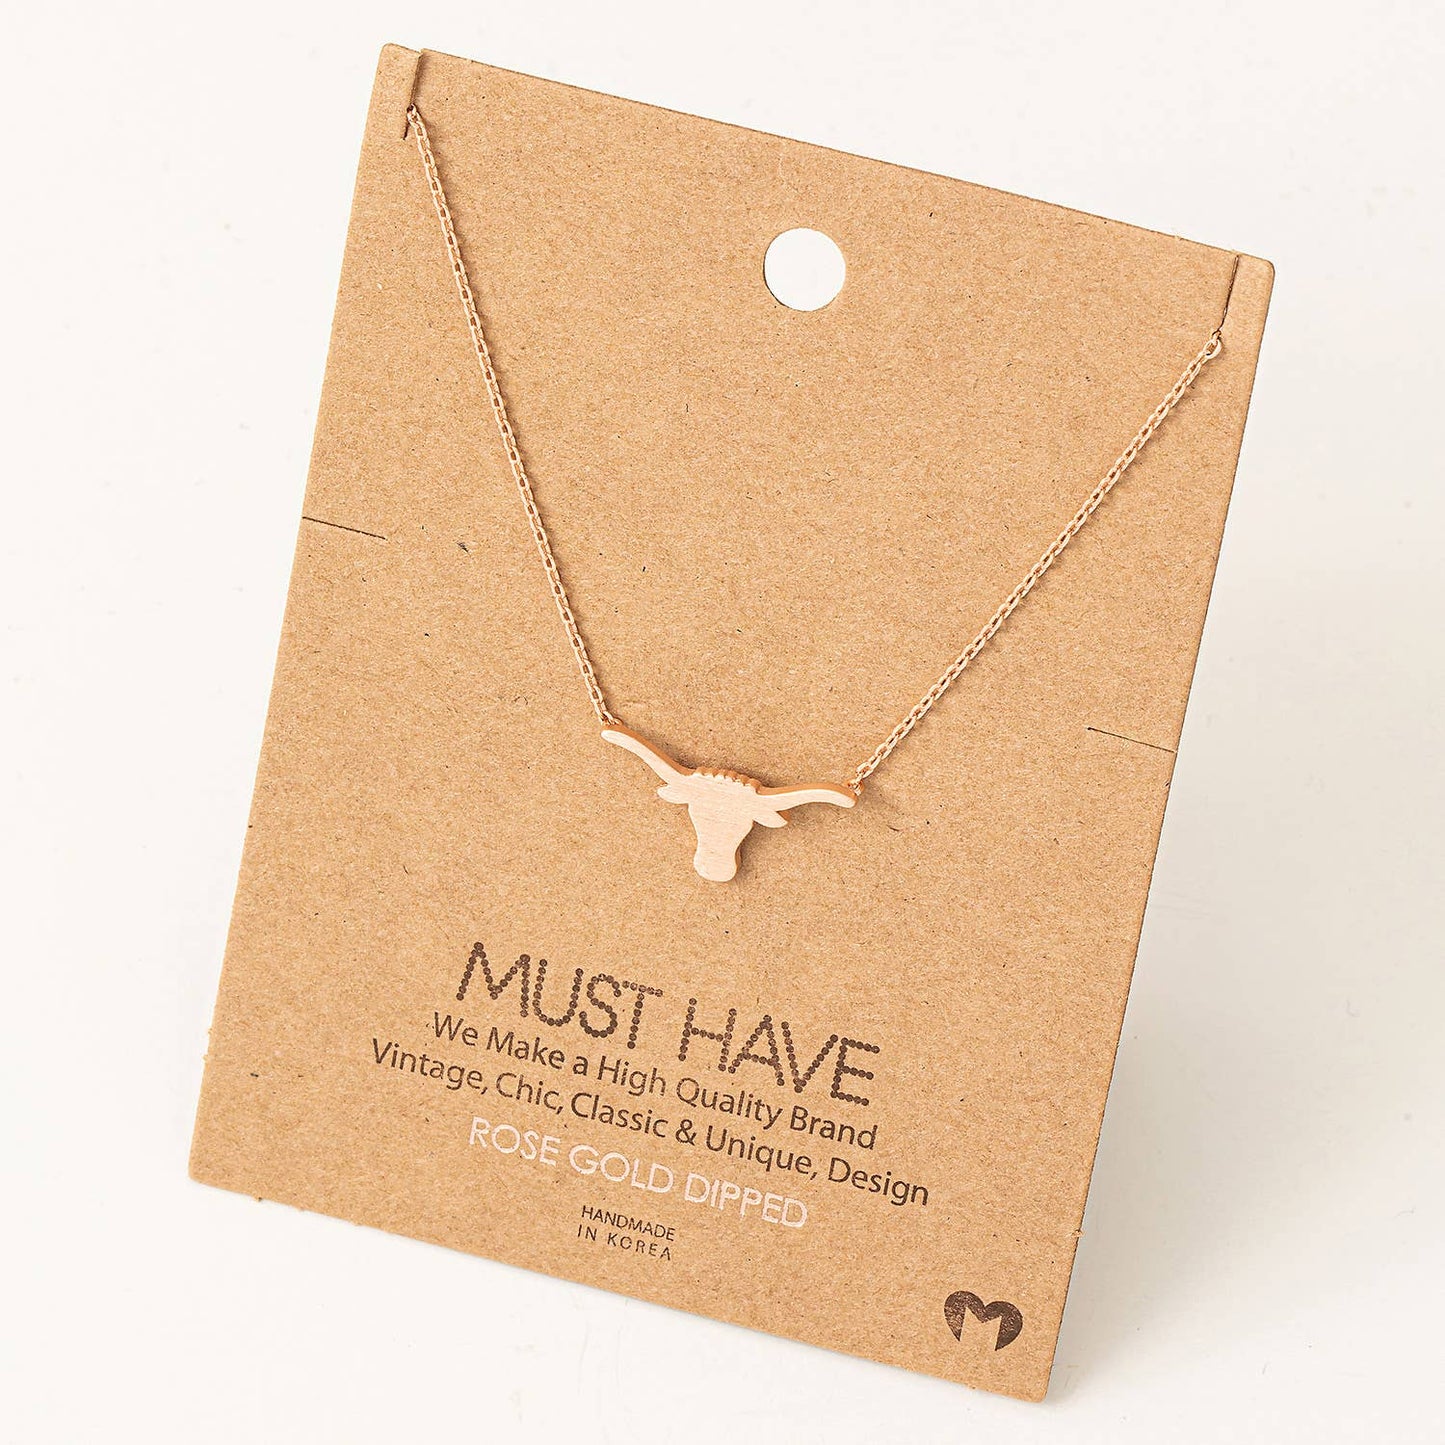 Fame Accessories - Dainty Bull Head Pendant Necklace